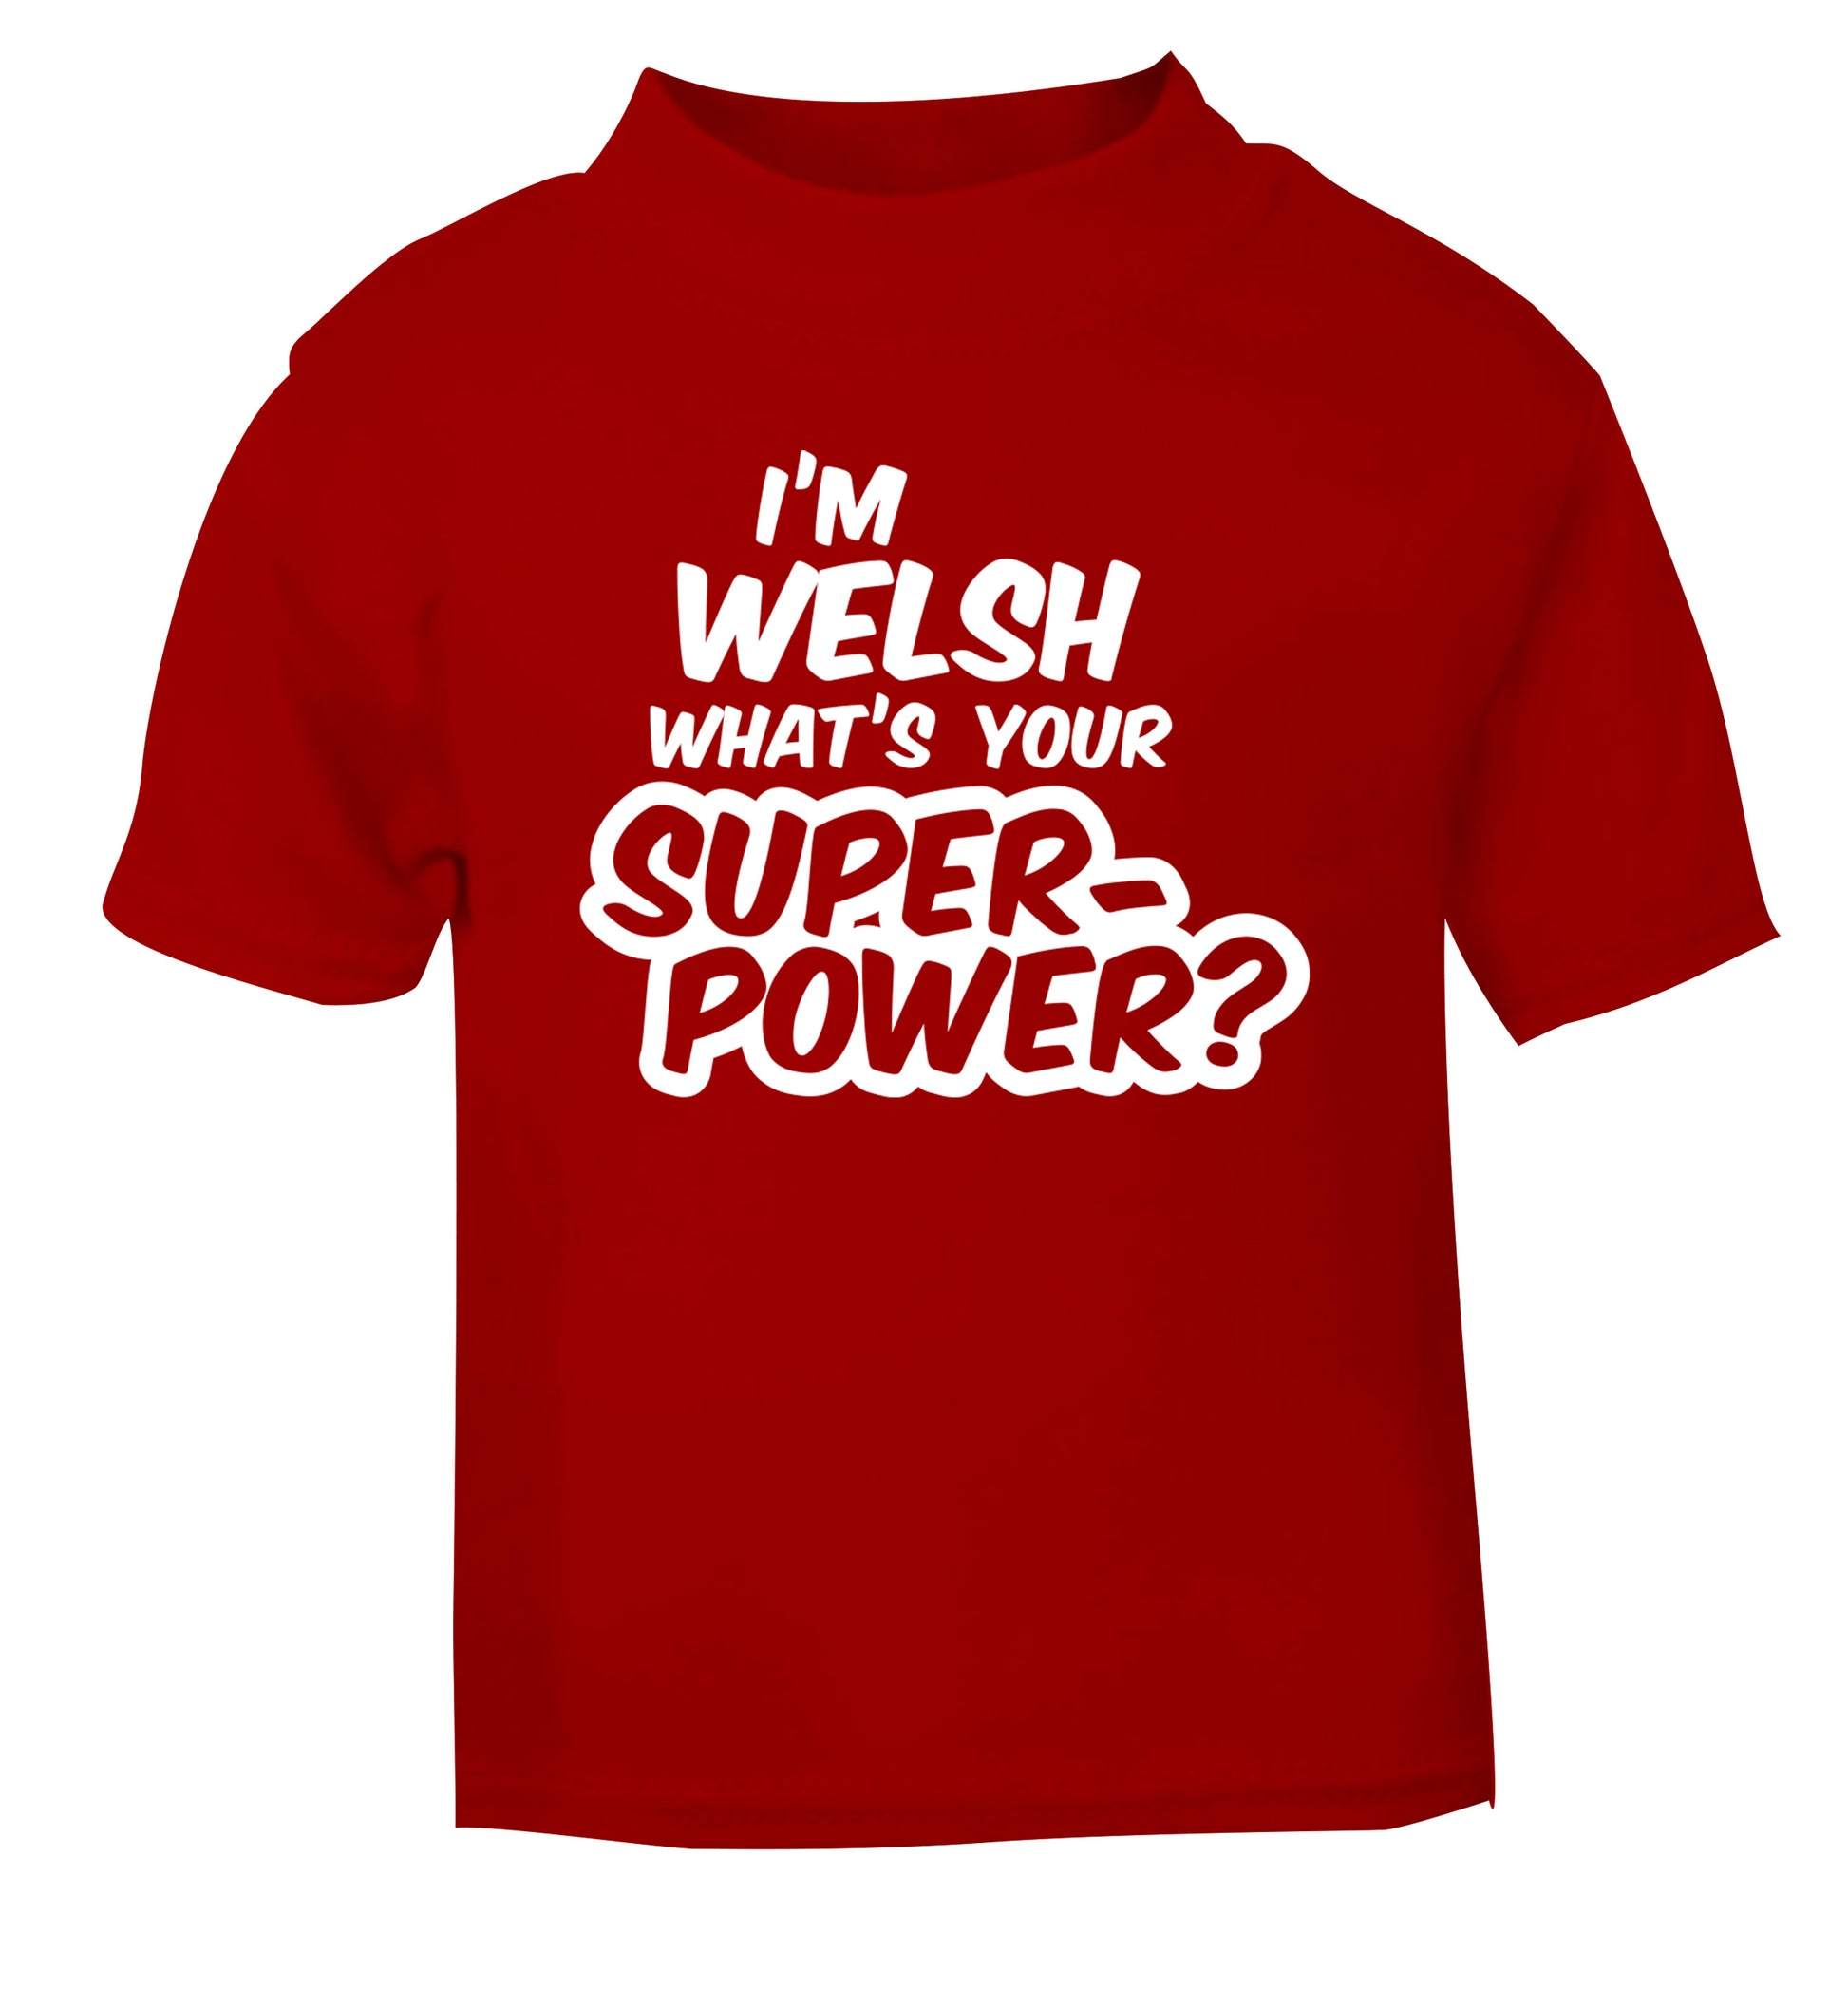 I'm Welsh what's your superpower? red Baby Toddler Tshirt 2 Years